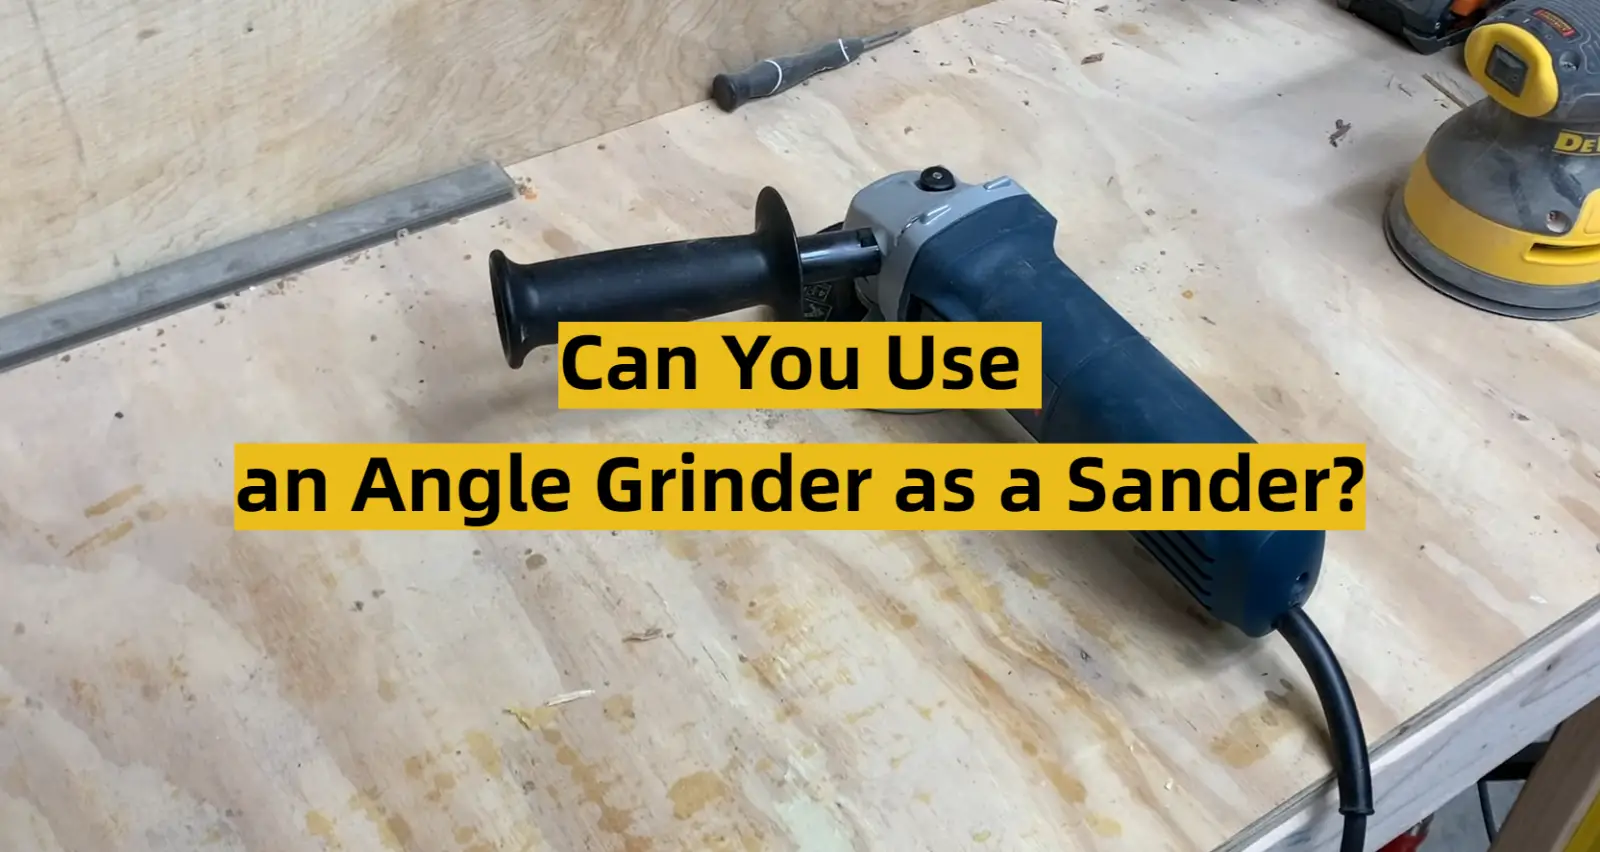 Can You Use an Angle Grinder as a Sander?